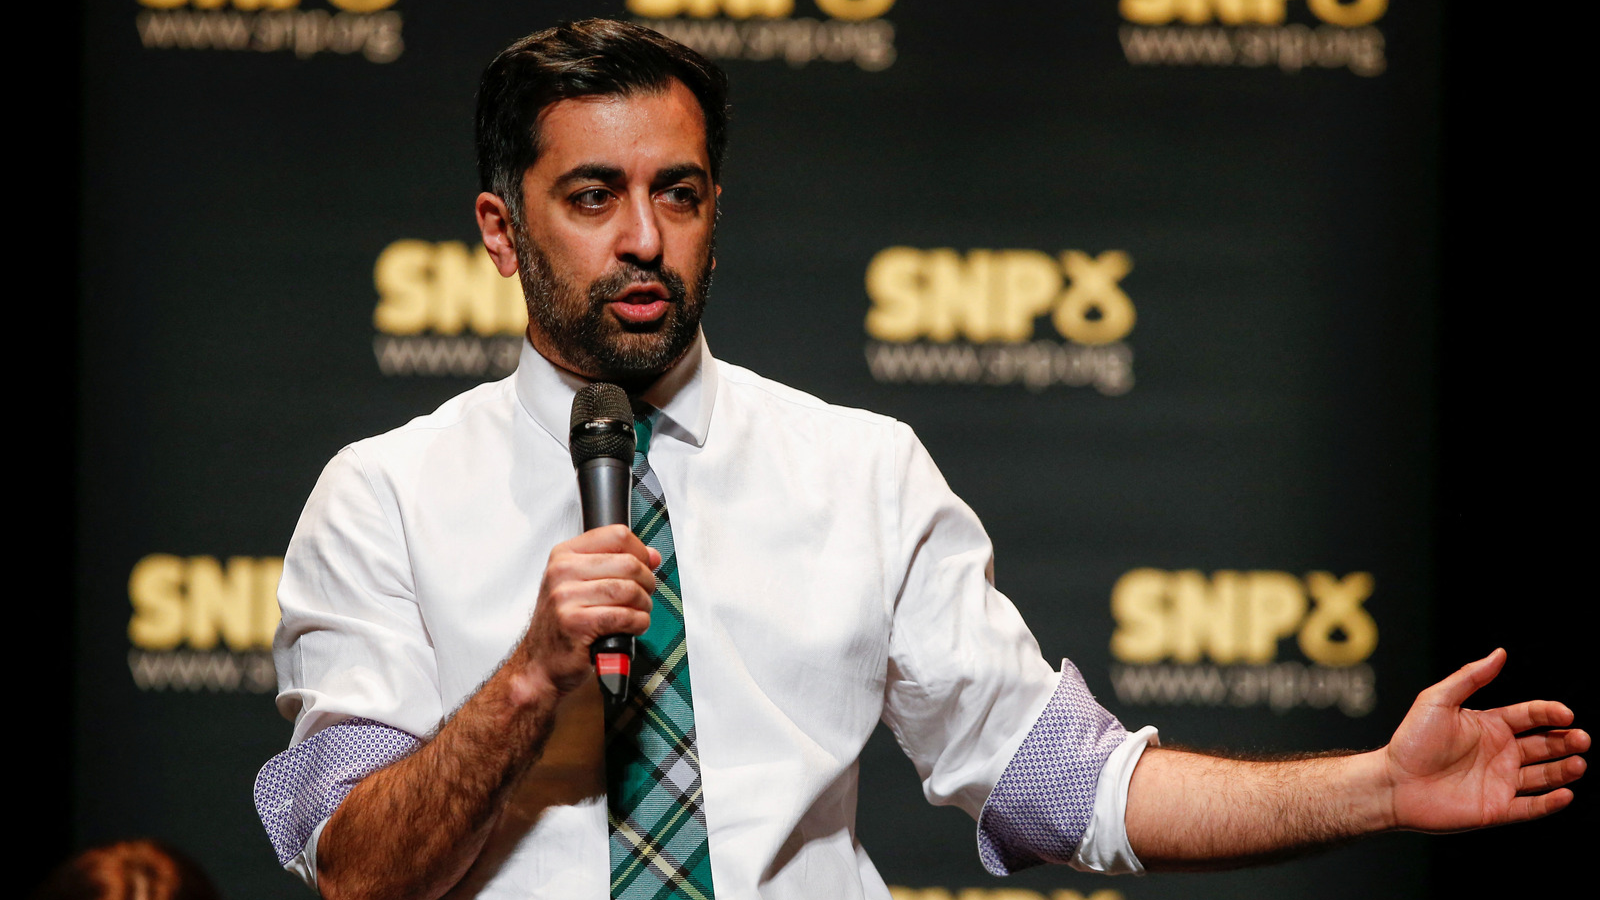 Humza Yousaf is set to become Scotland's new First Minister after being named the new leader of the SNP party./Reuters/Craig Brough.